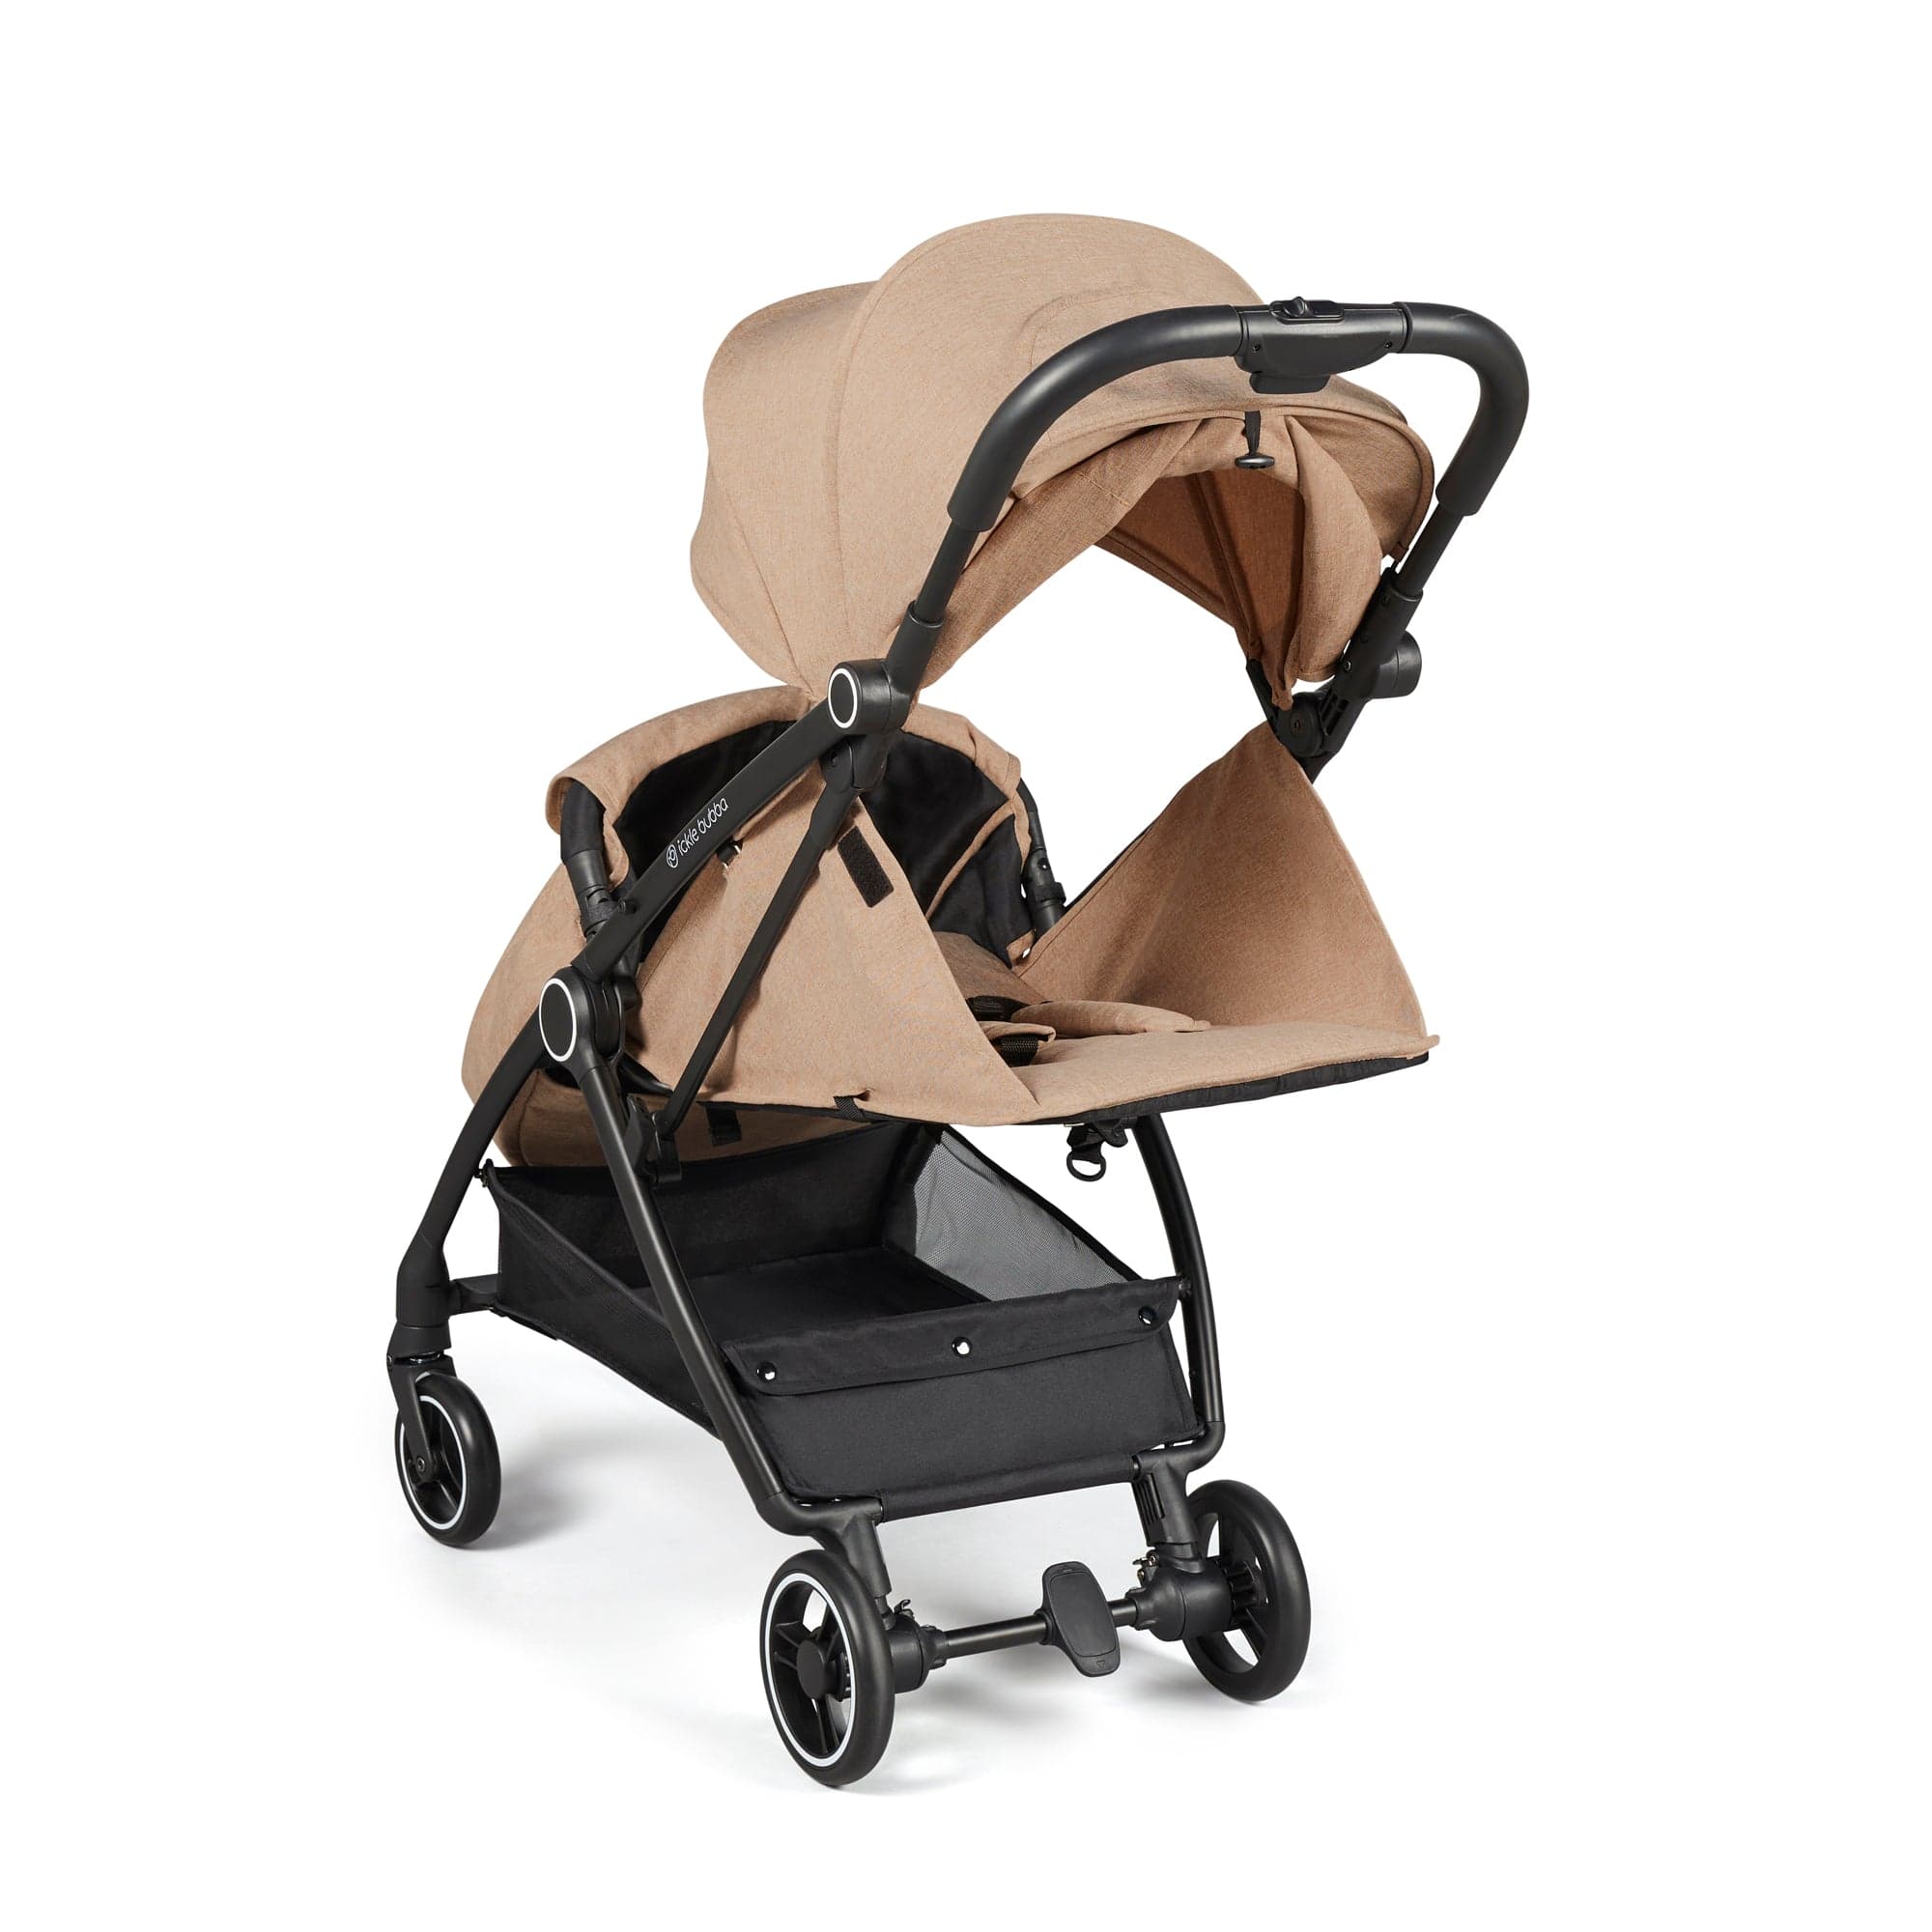 Ickle Bubba Aries Prime Autofold Stroller in Biscuit Pushchairs & Buggies 15-005-300-157 5056515031317